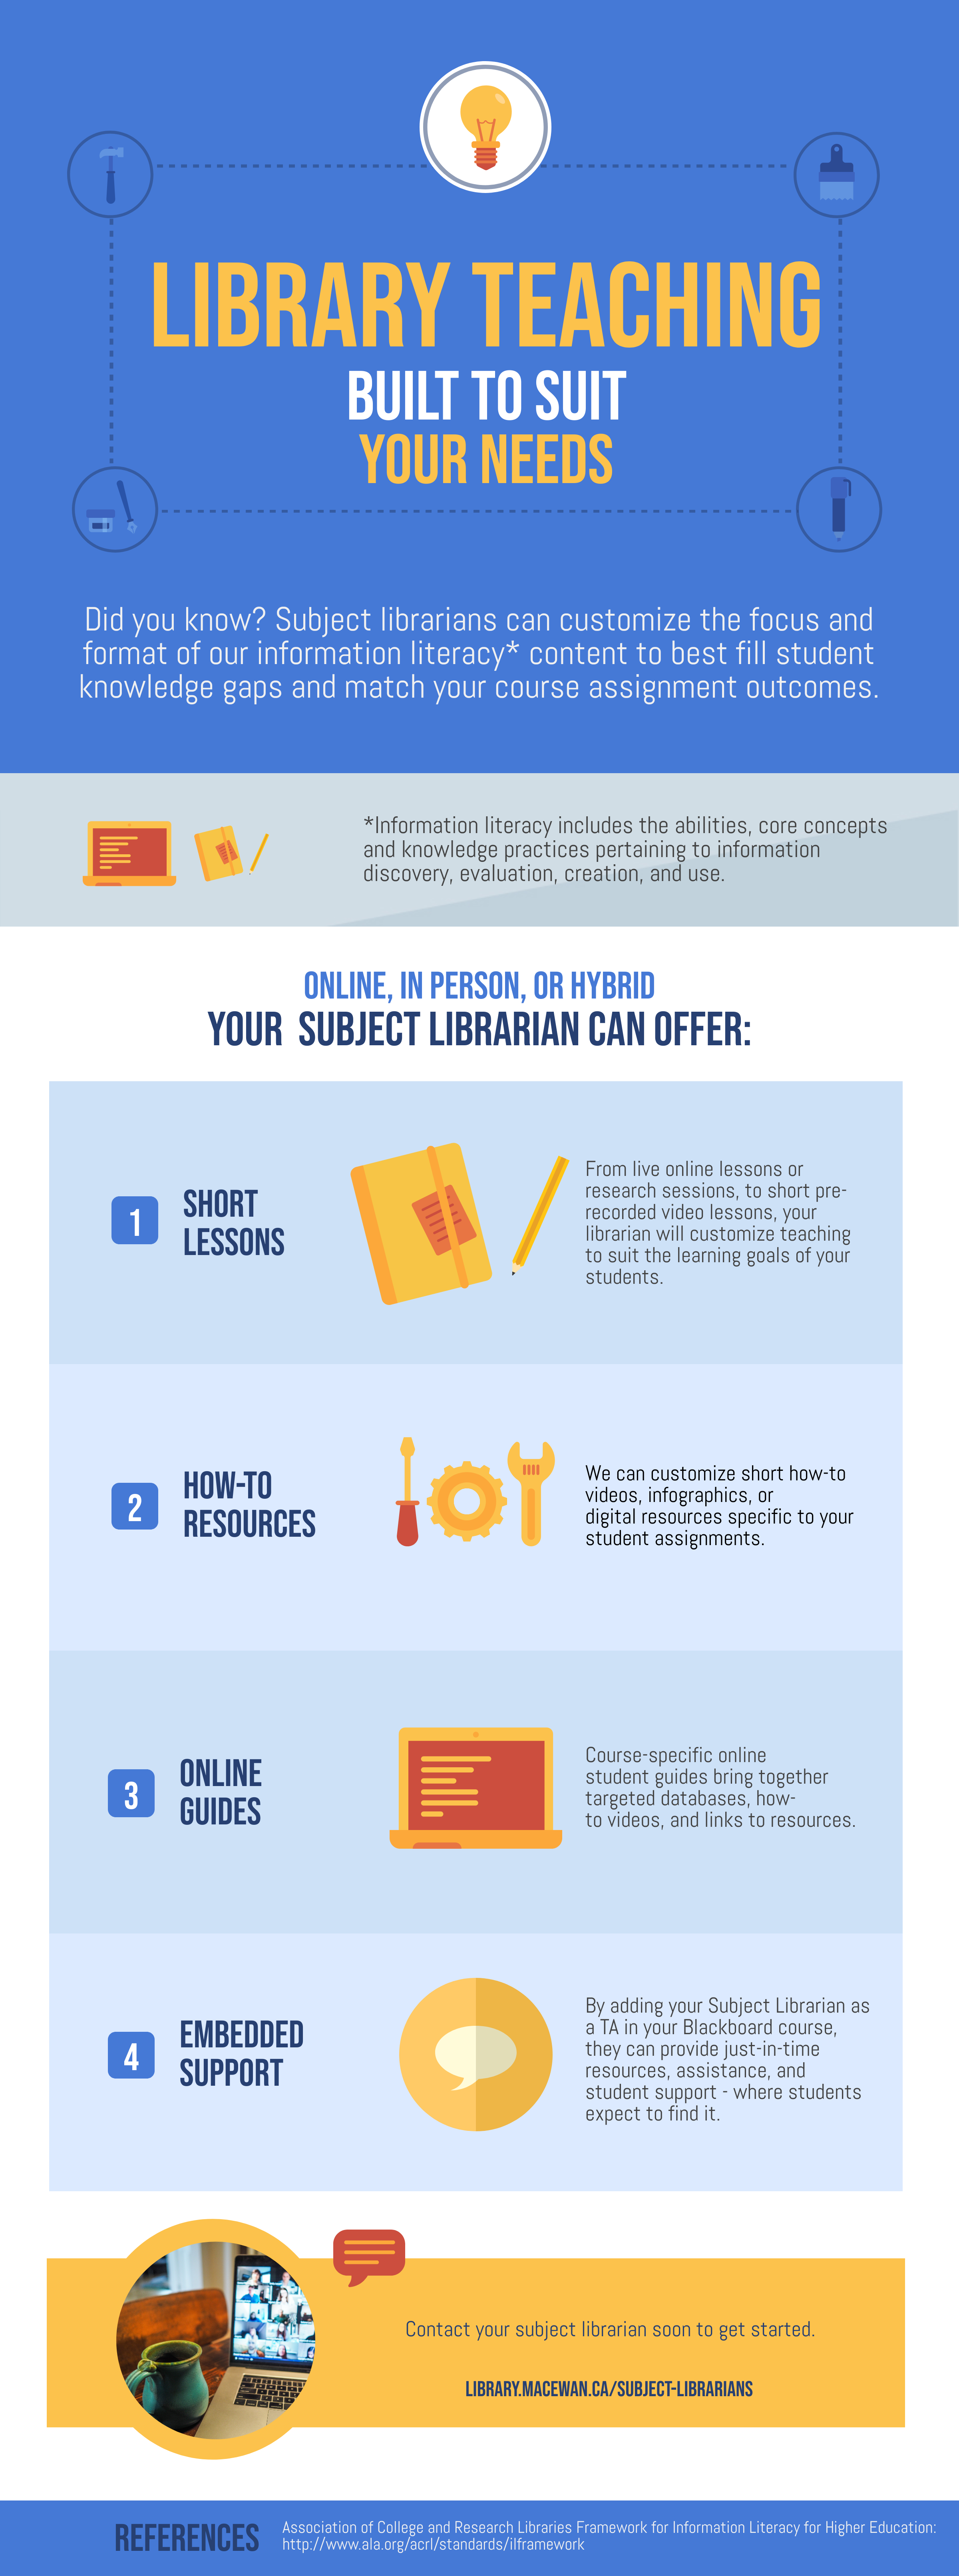 Infographic sharing different ways librarians can provide support in classes. 1. Short Lessons 2. How-To Resources 3. Online Guides 4. Embedded Support